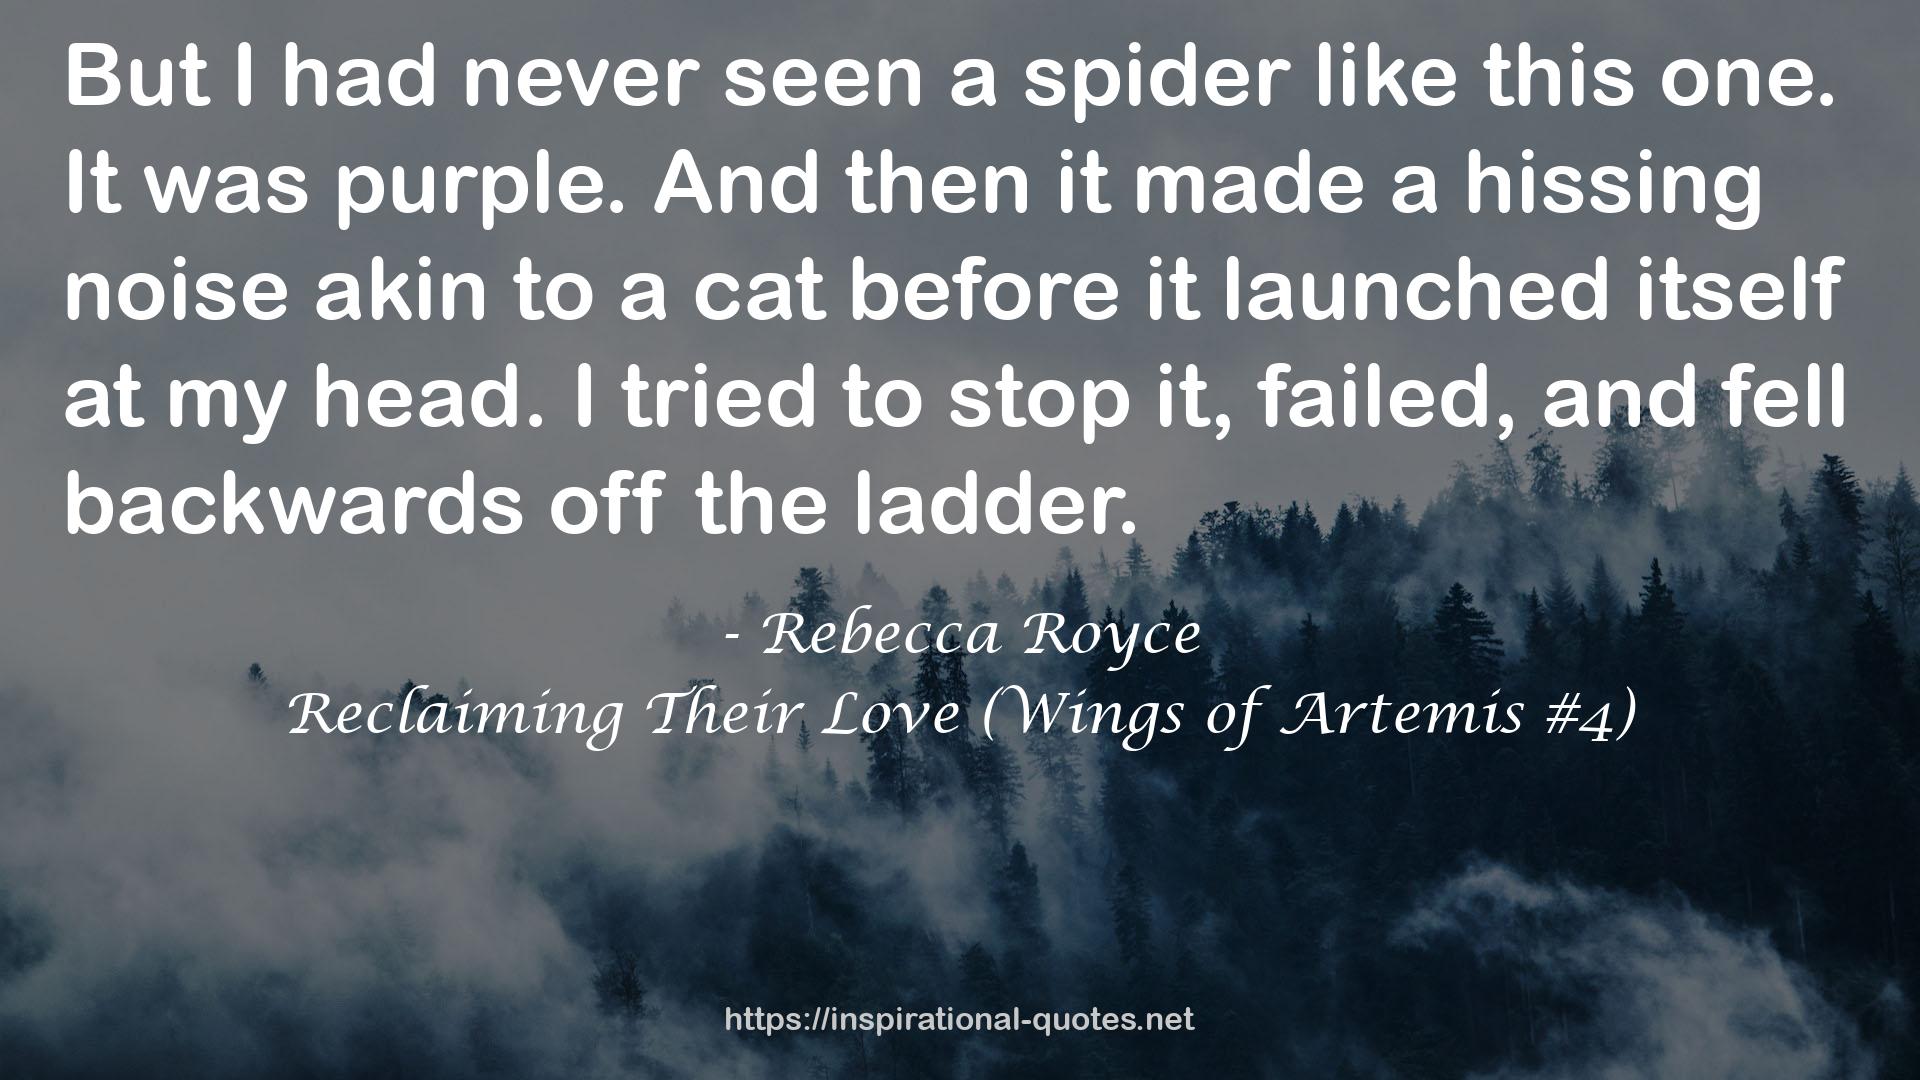 Reclaiming Their Love (Wings of Artemis #4) QUOTES